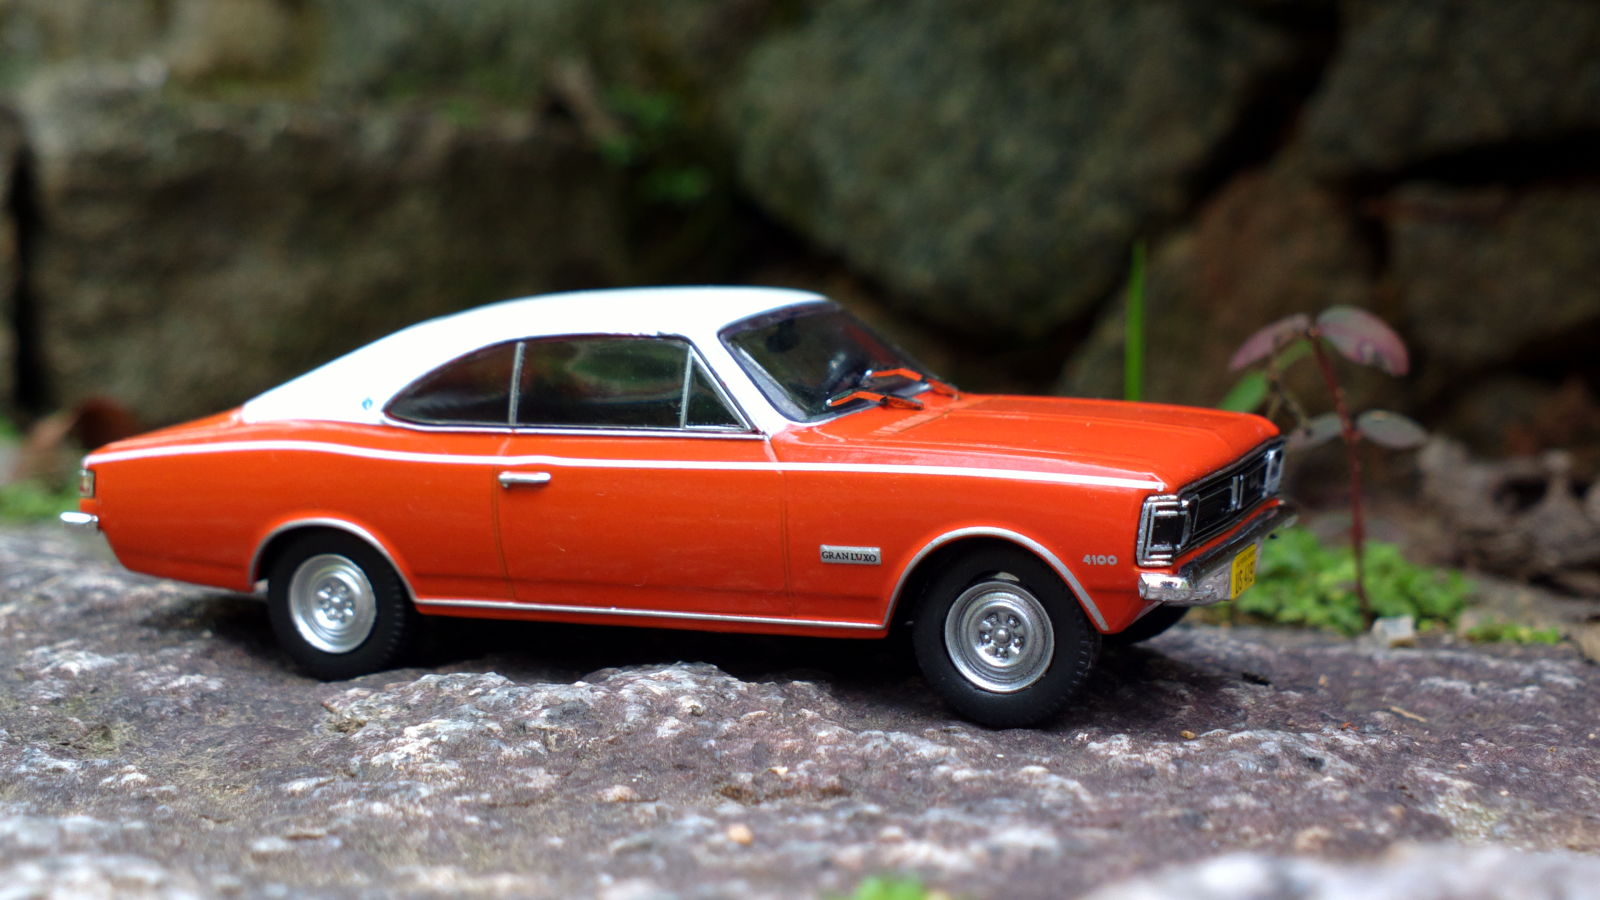 Illustration for article titled 1/43 1971 Chevrolet Opala Gran Luxo